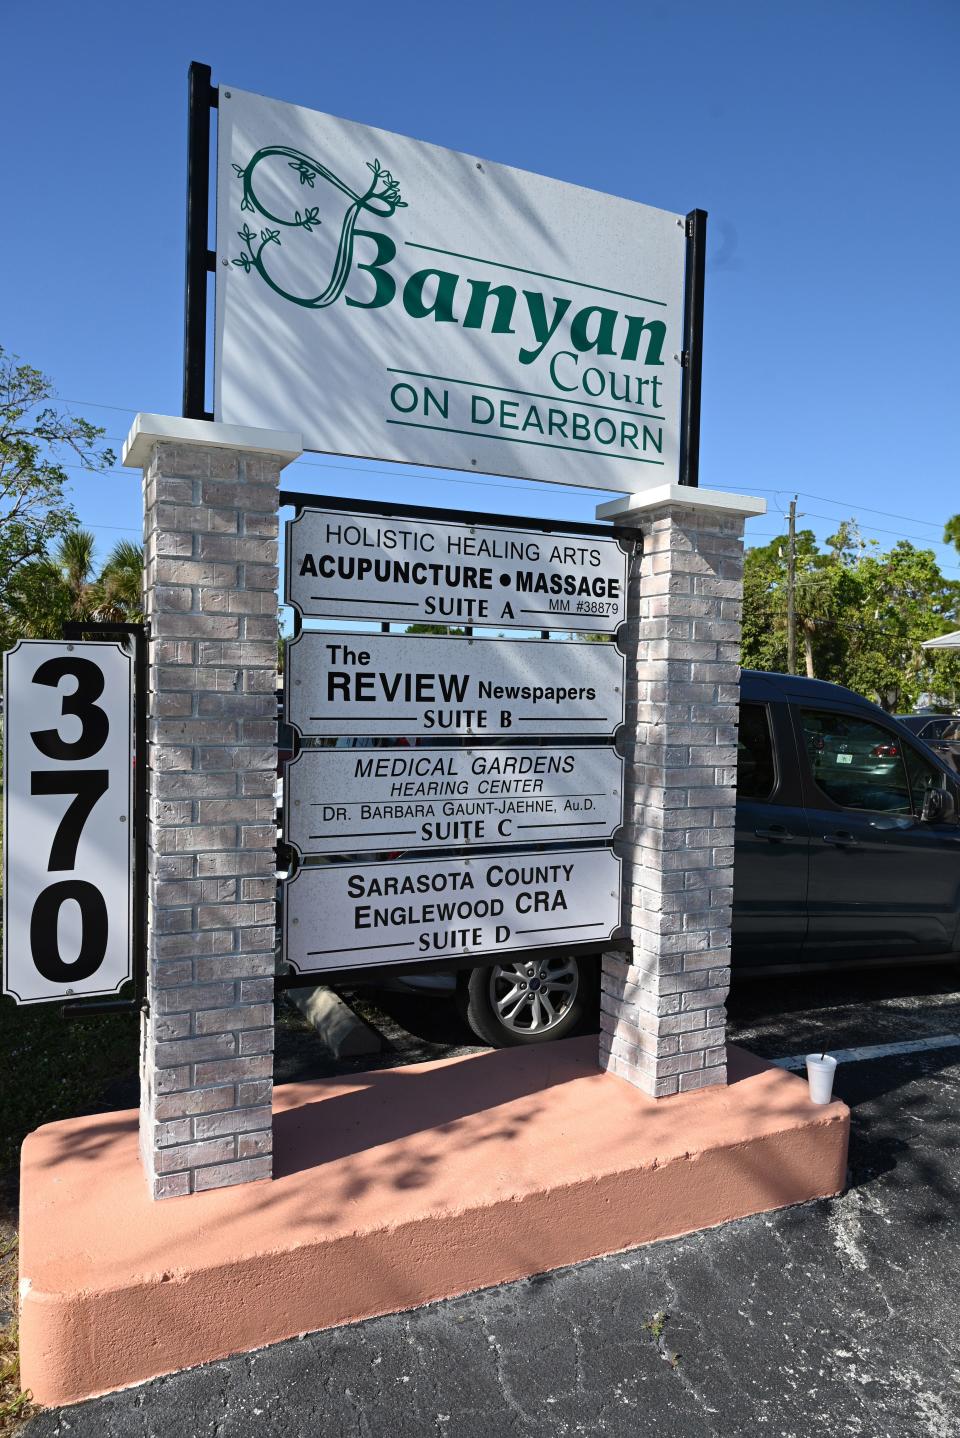 The Sarasota County Englewood CRA office is located in Banyan Court on Dearborn located at 270 Dearborn Street, Englewood.